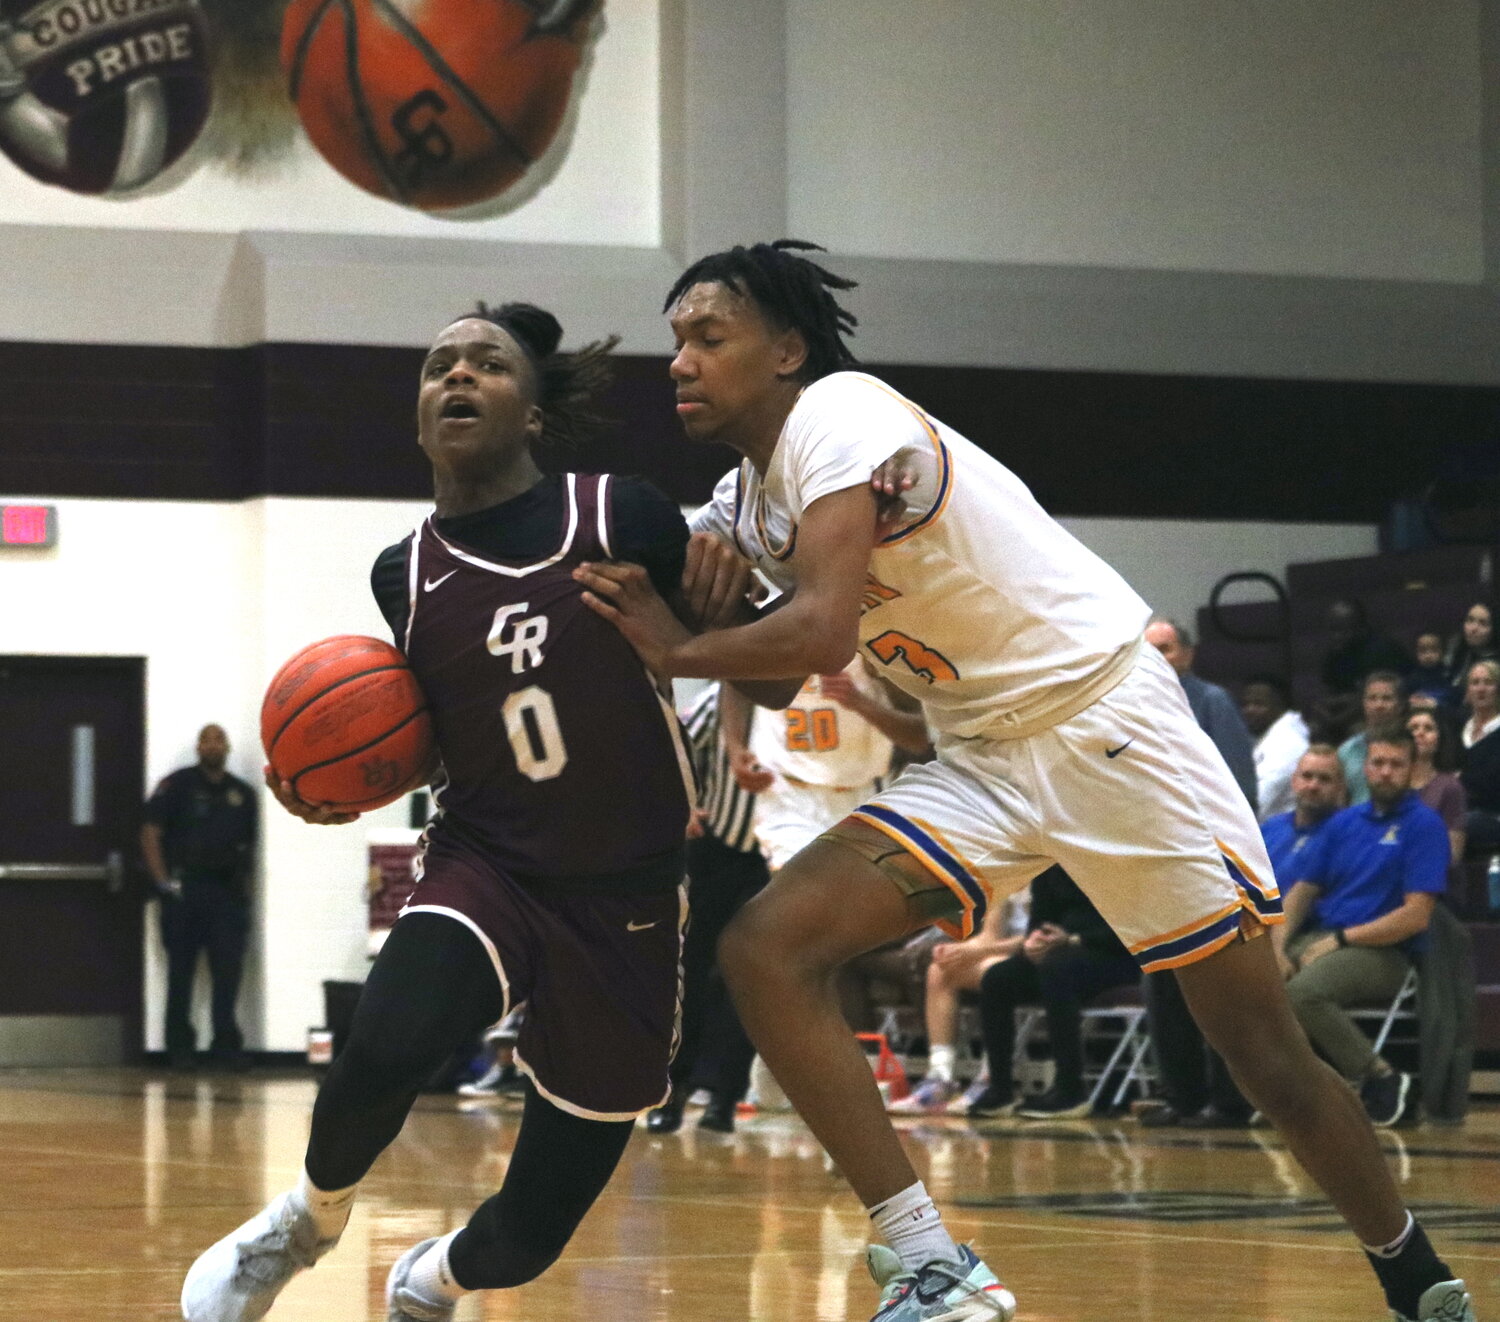 Prince Jones-Bynum fights through contact during Friday's game between Cinco Ranch and Klein at the Cinco Ranch gym.